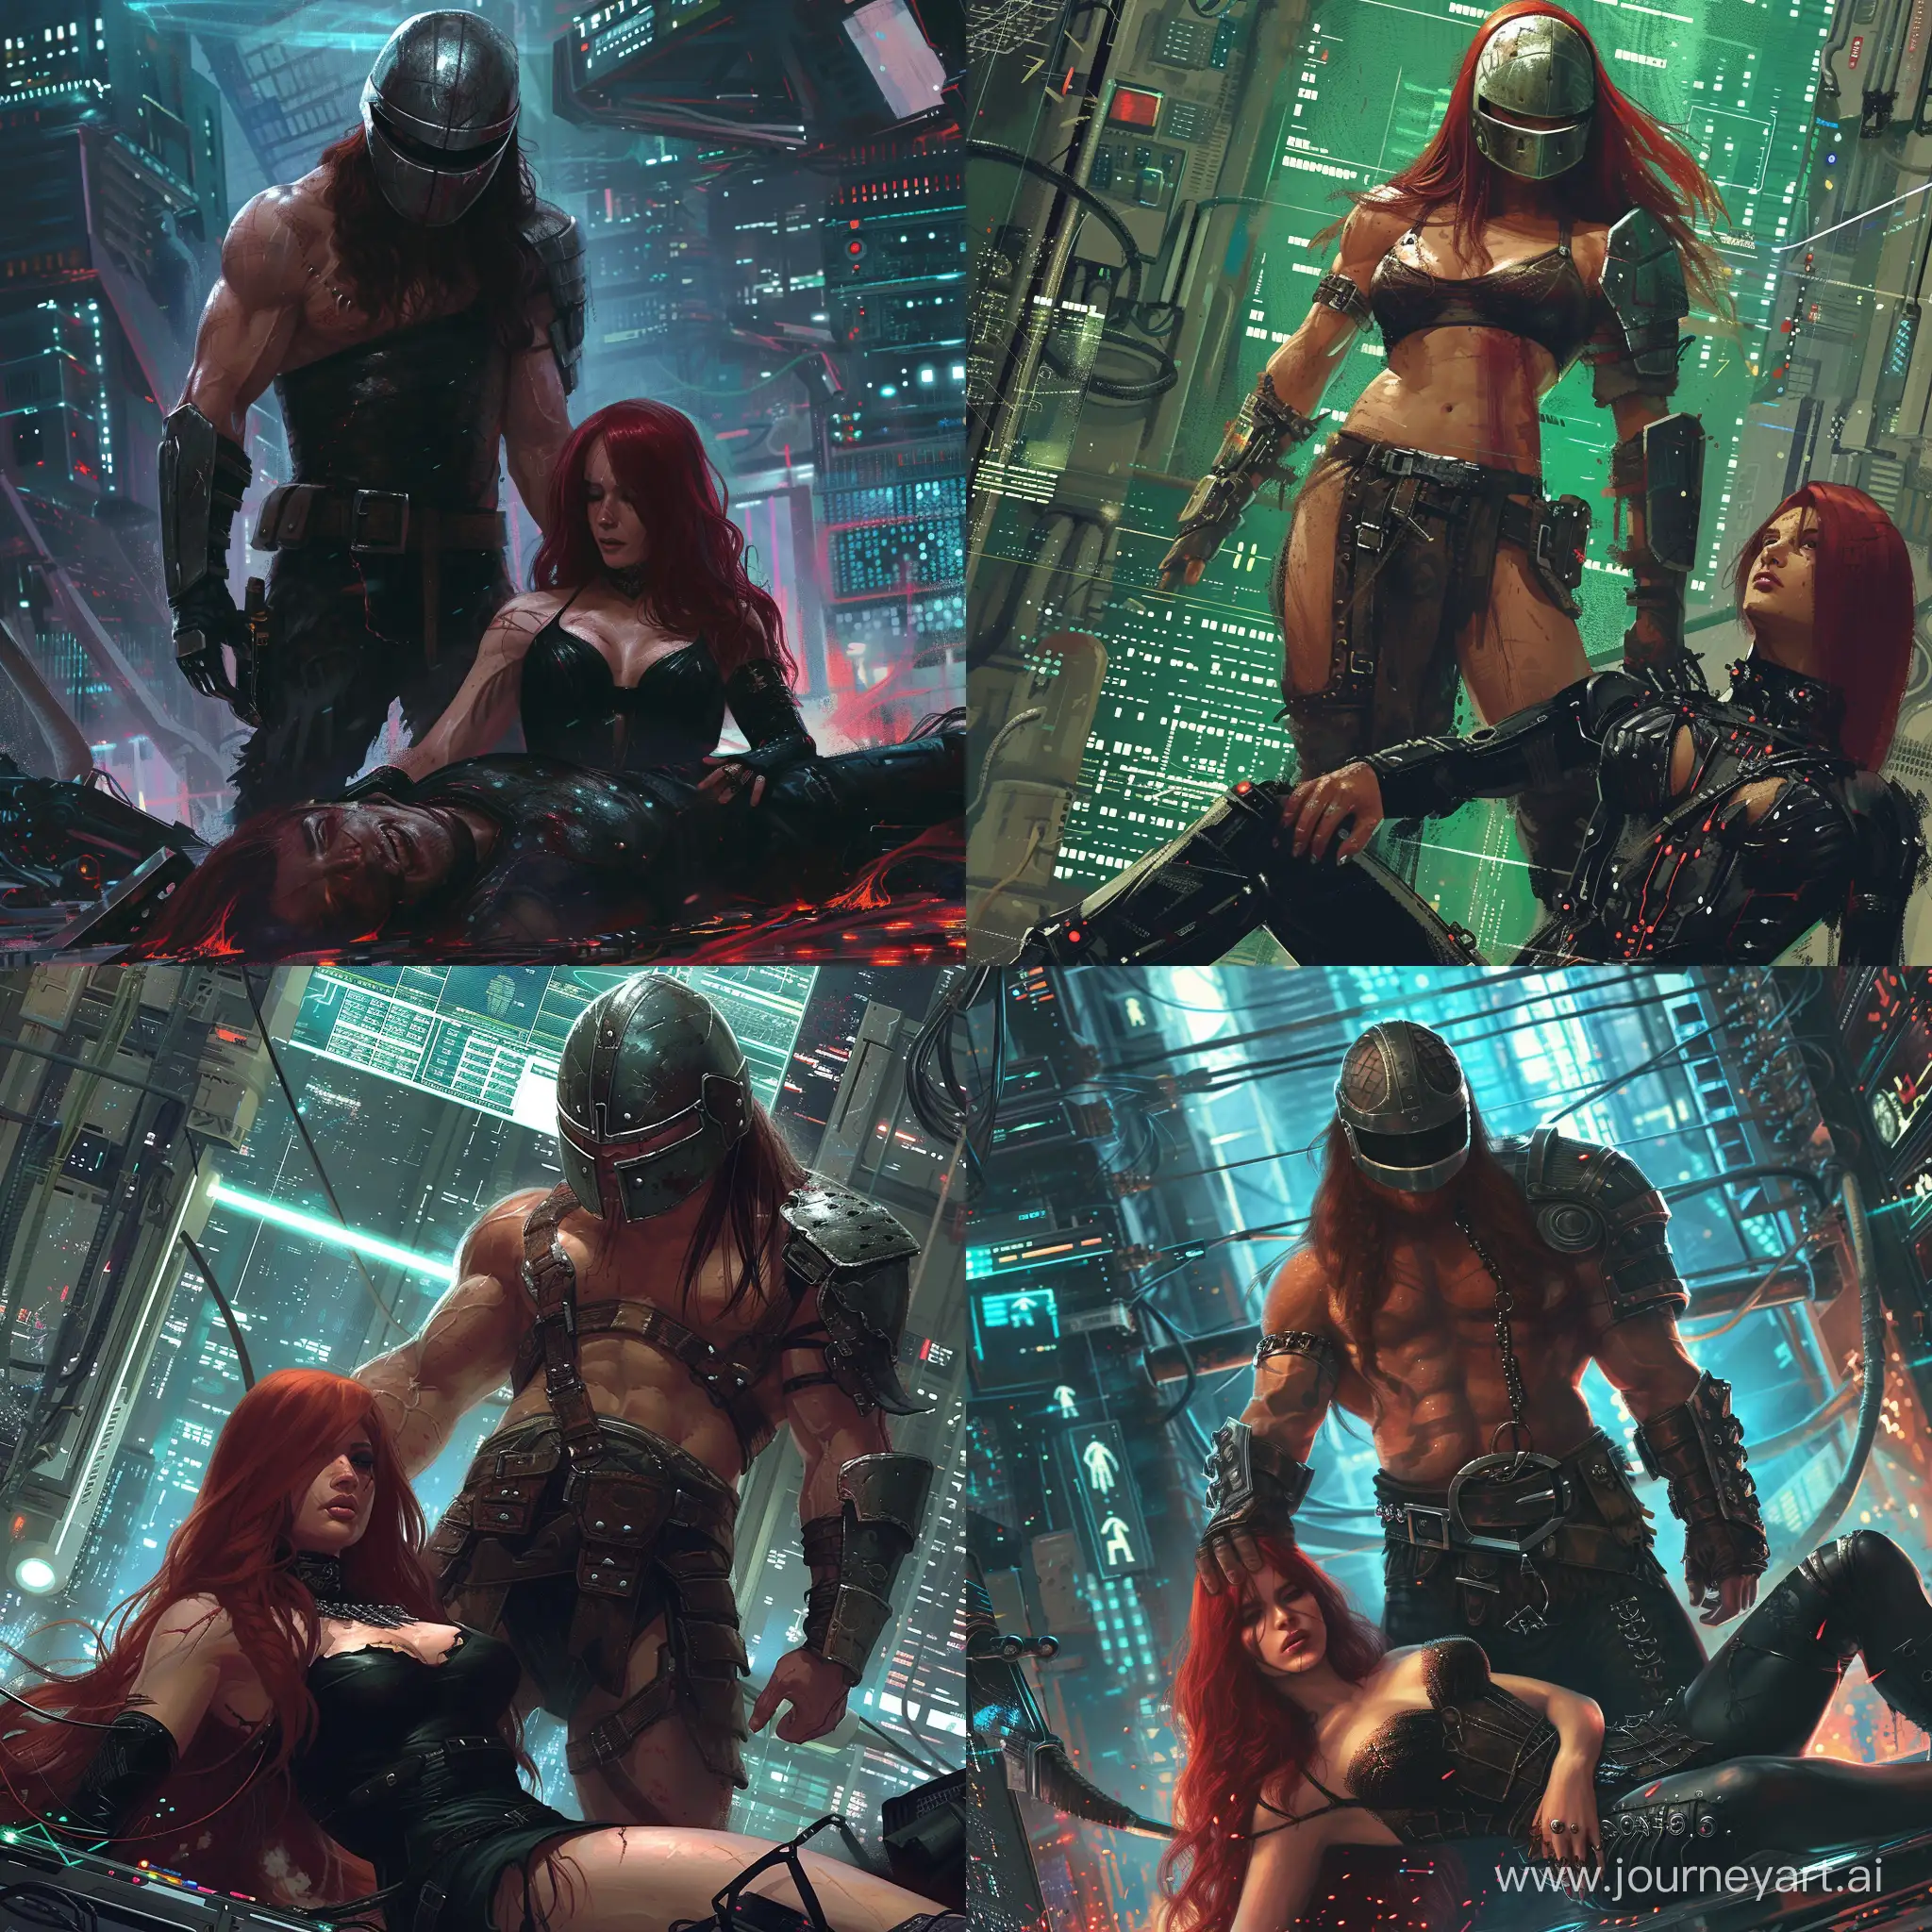 Chinese Conan the Barbarian in visor helmet covering whole face standing on the defeated body of cyberpunk red-headed Russian woman in black Gothic clothing. High-tech computing background.